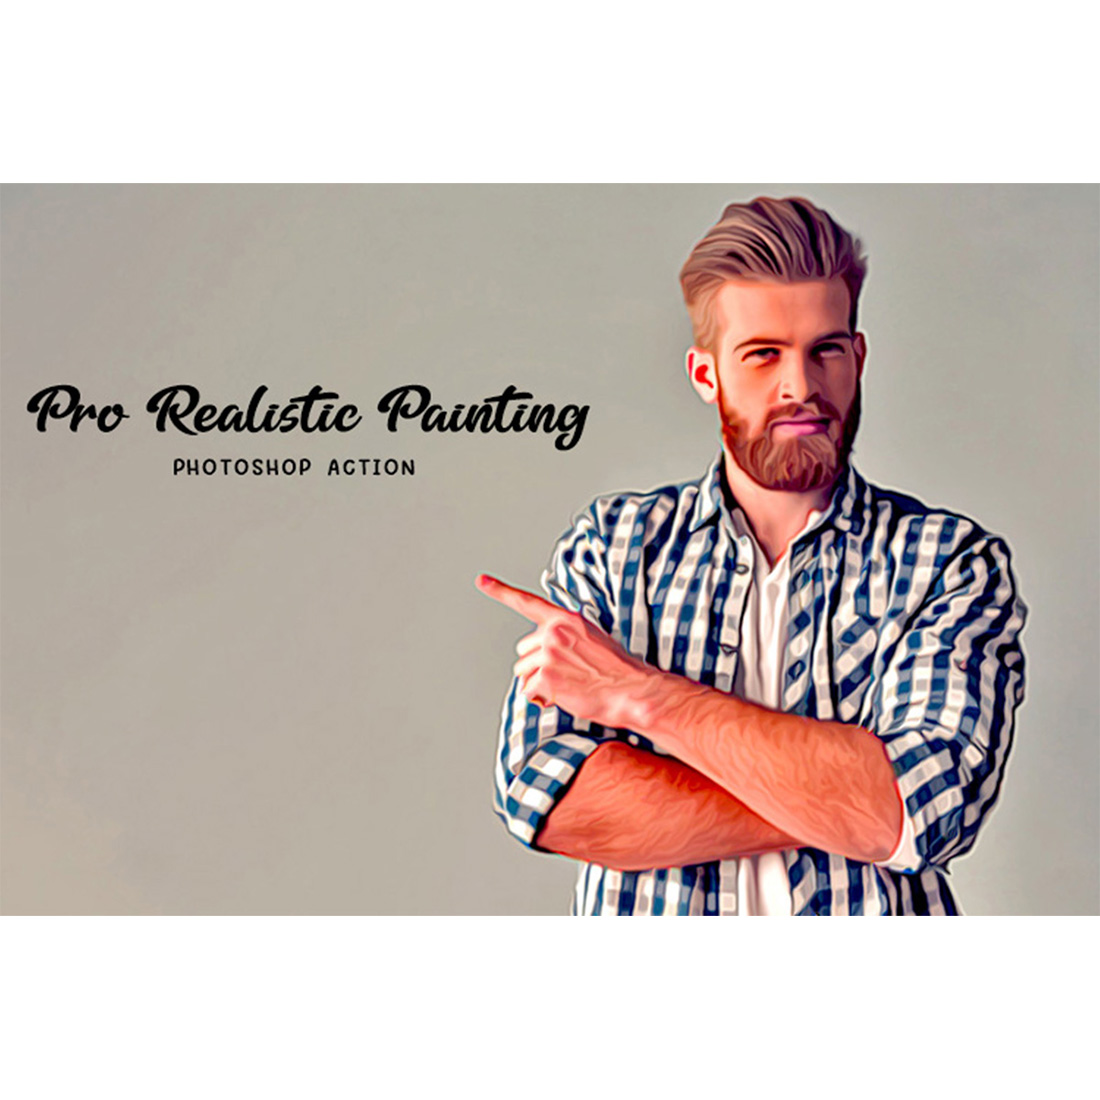 Pro Realistic Painting Photoshop Action cover image.